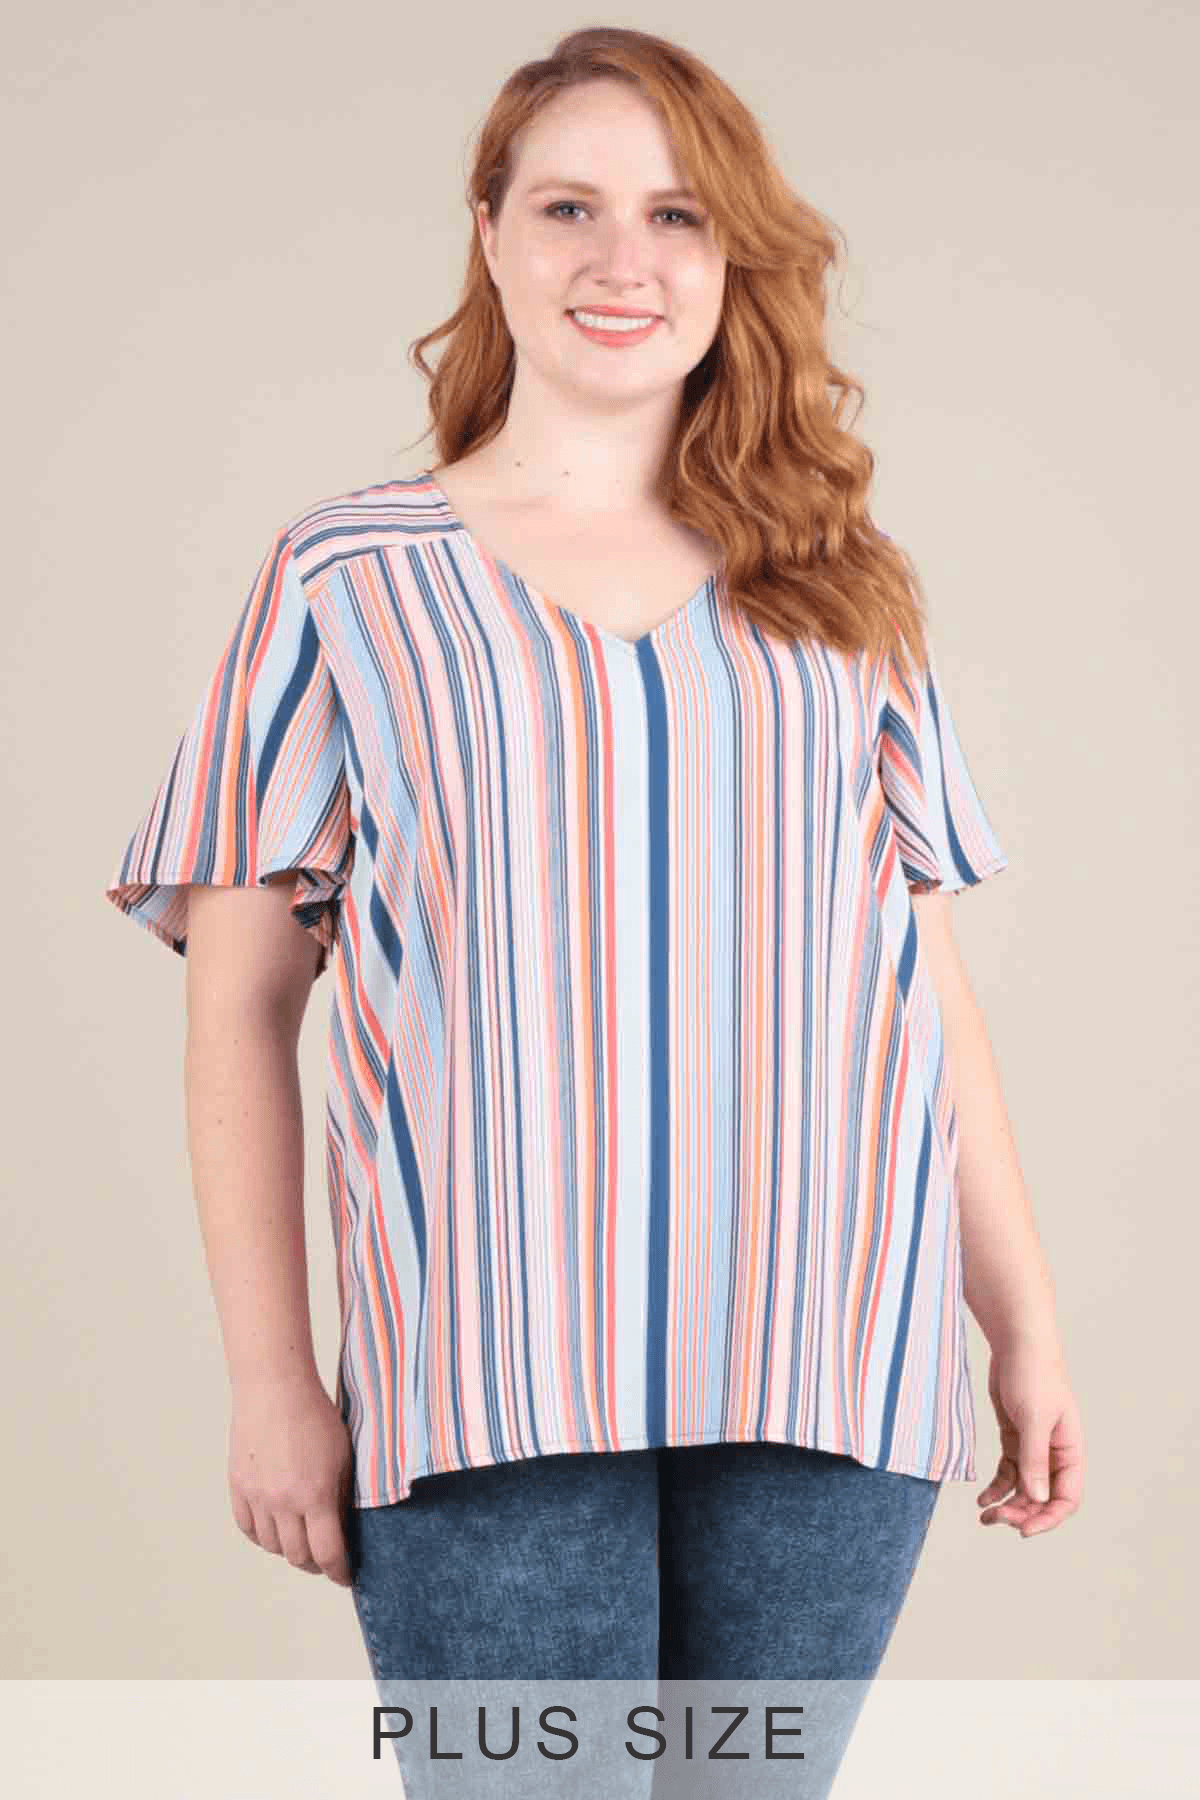 Diane Vertical Logo - Diane Vertical Striped Top | Women's Plus Size Tops | SKIES ARE BLUE